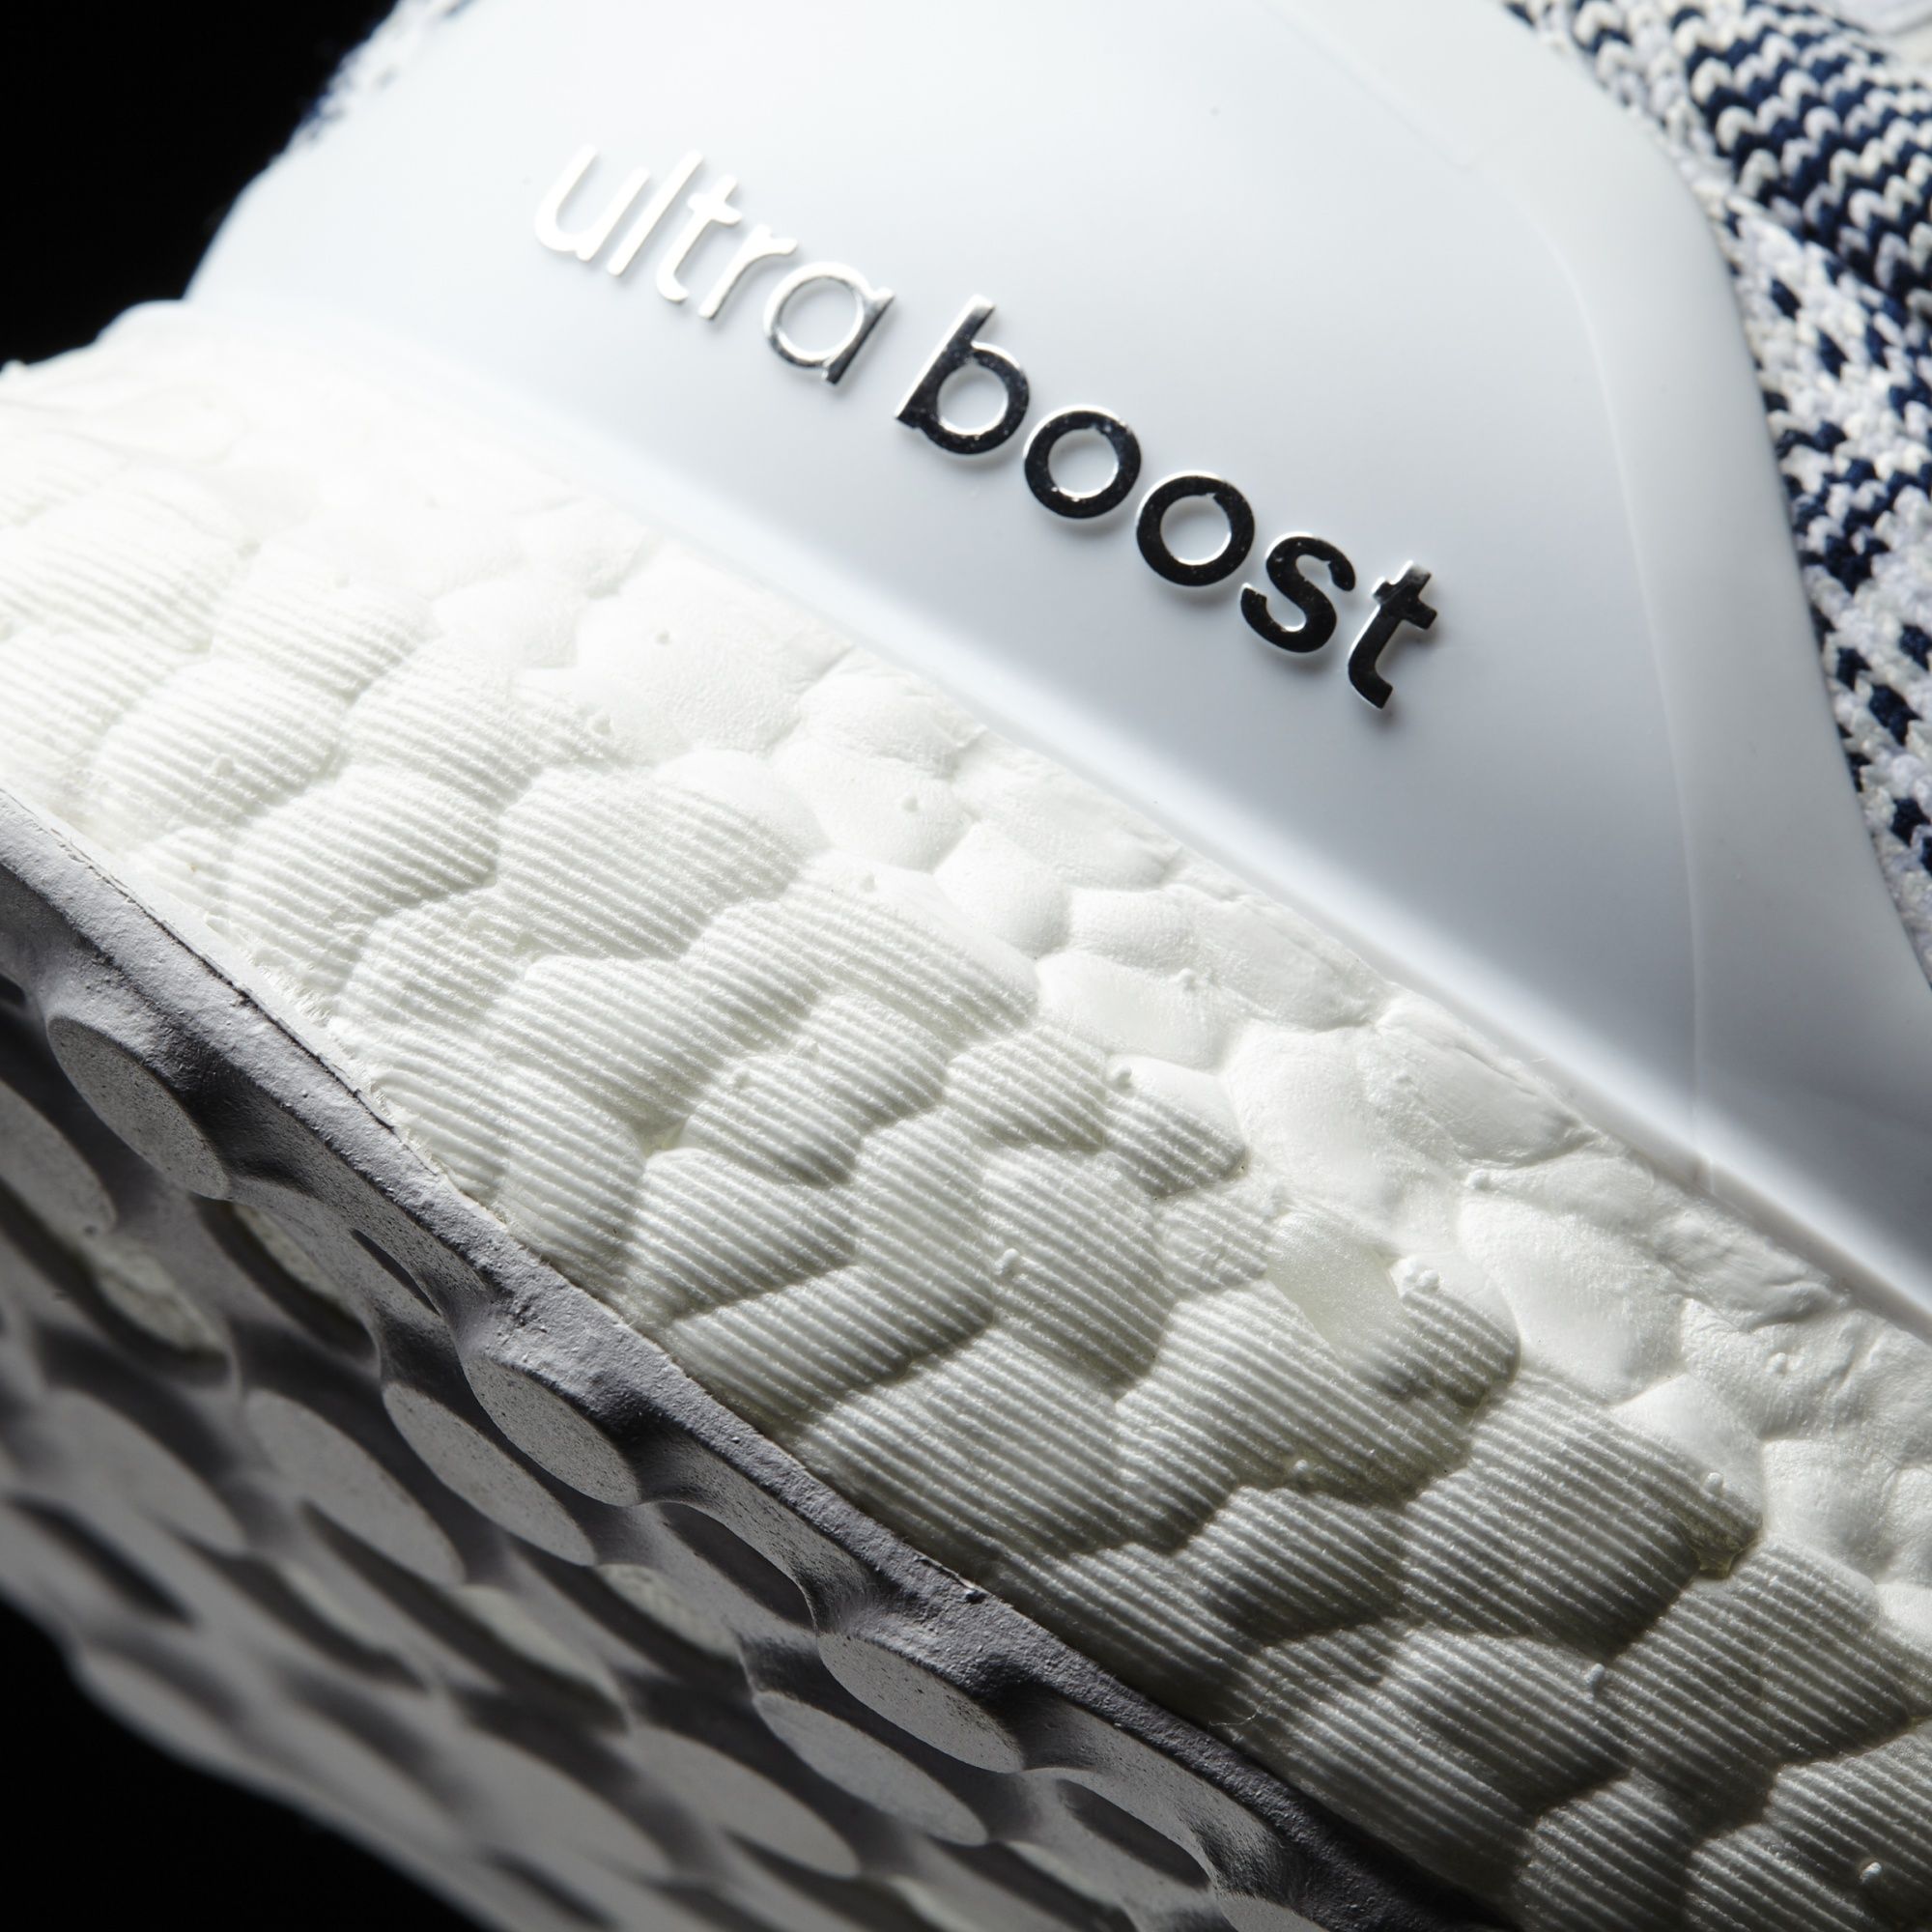 Adidas Ultra Boost Uncaged
« Non Dyed »